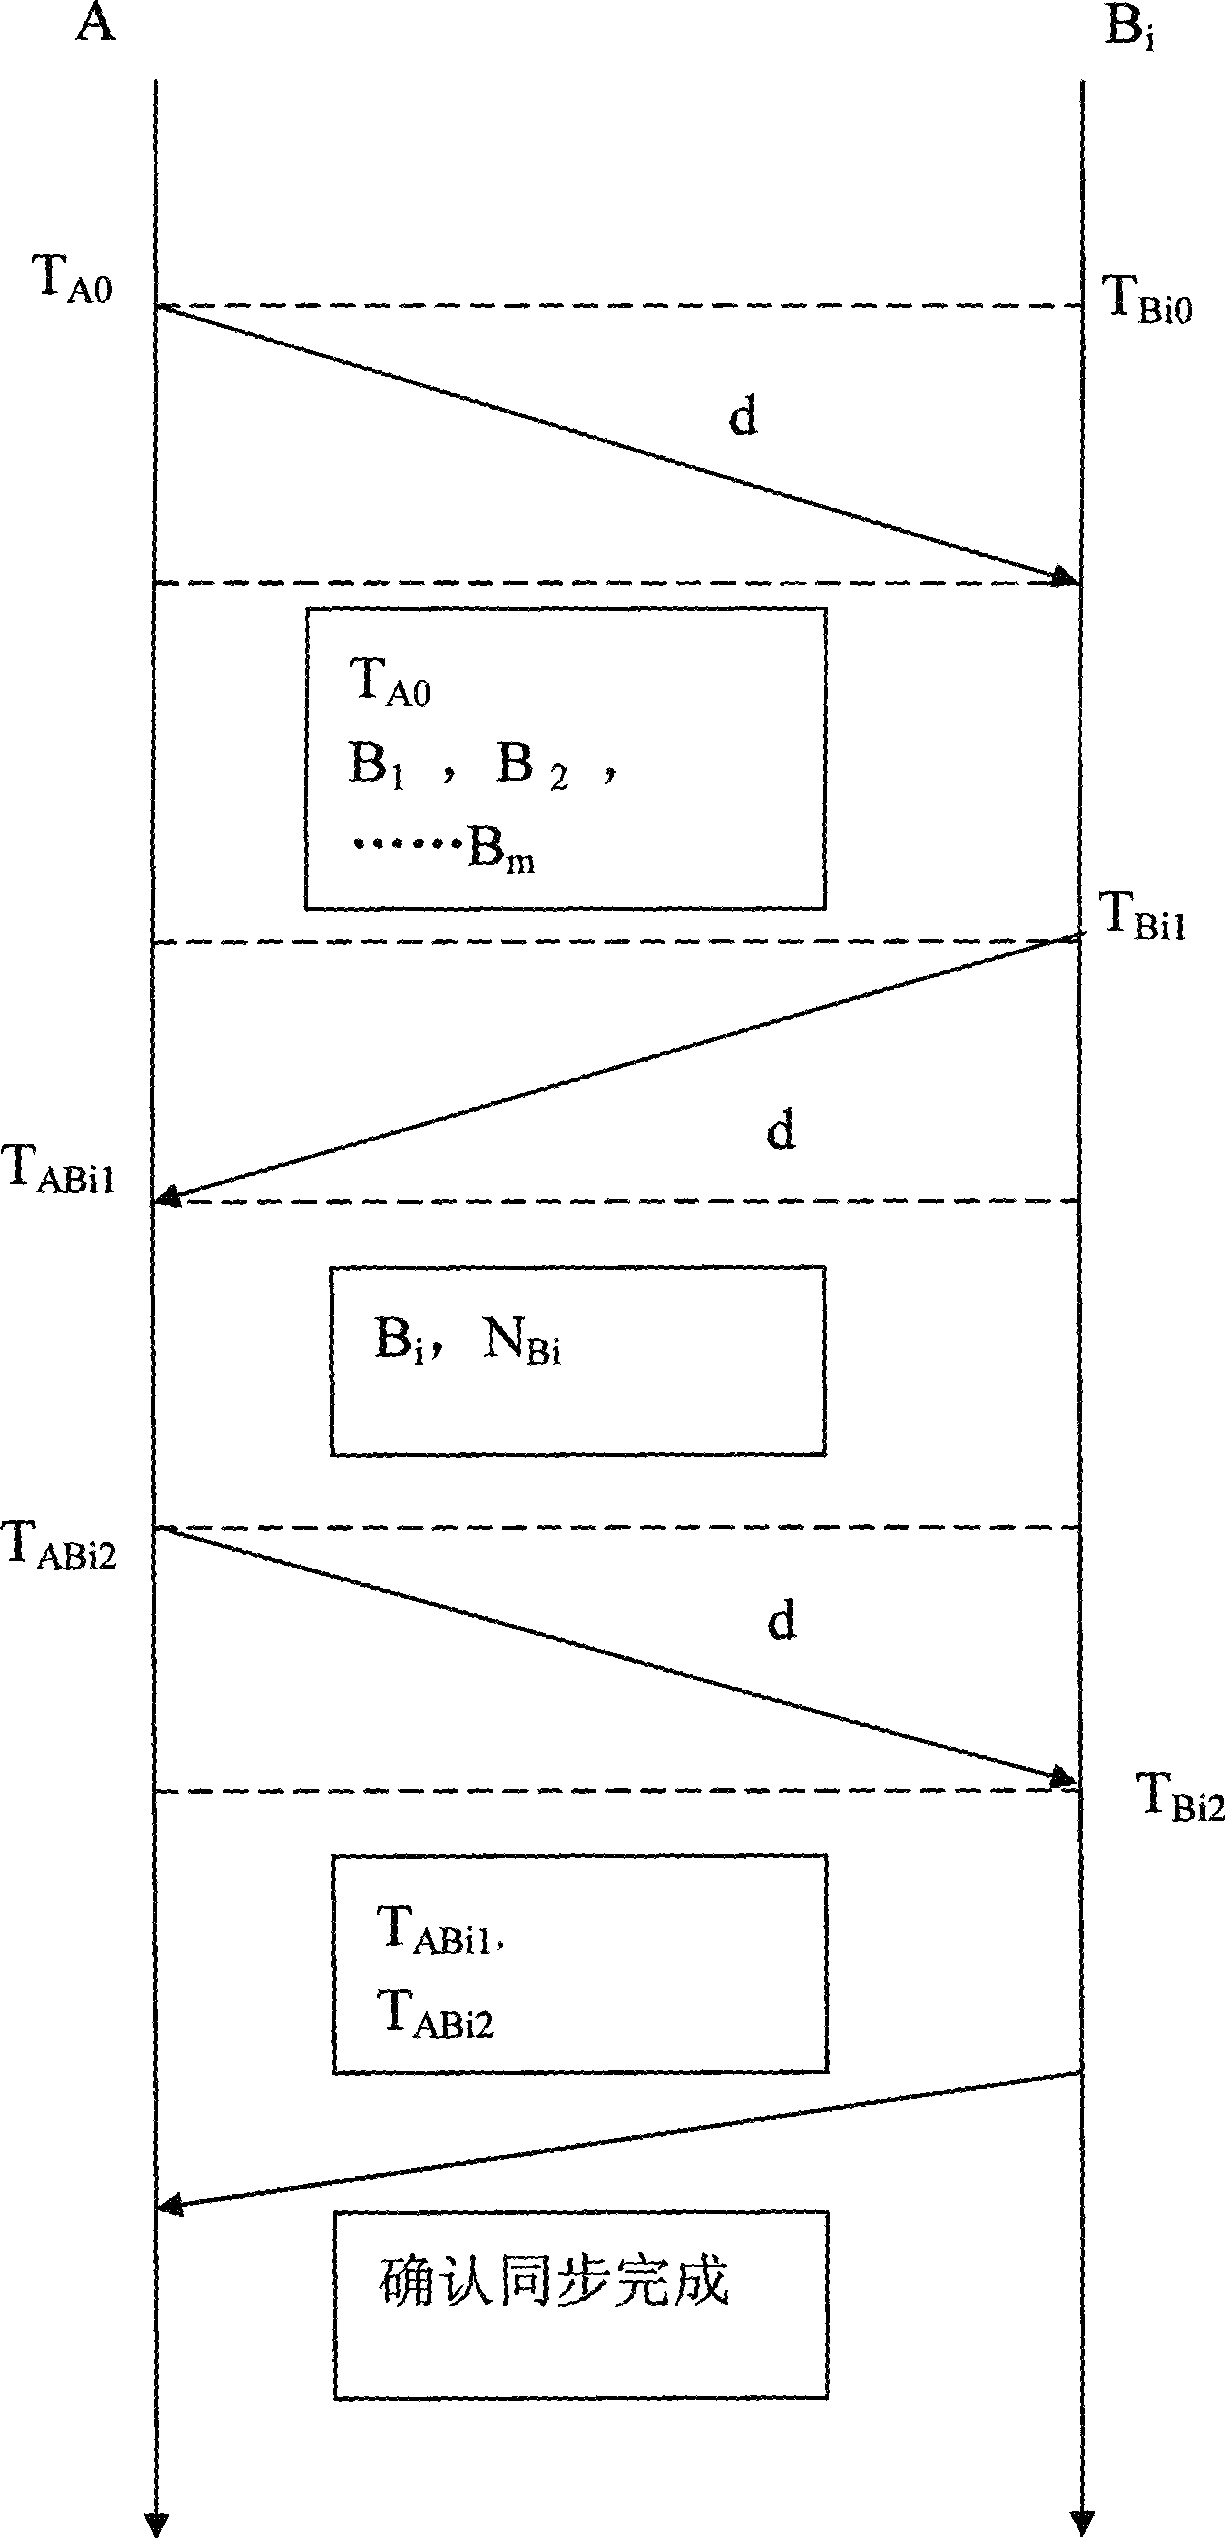 Time synchronization method based on vehicle ad hoc network topology structure